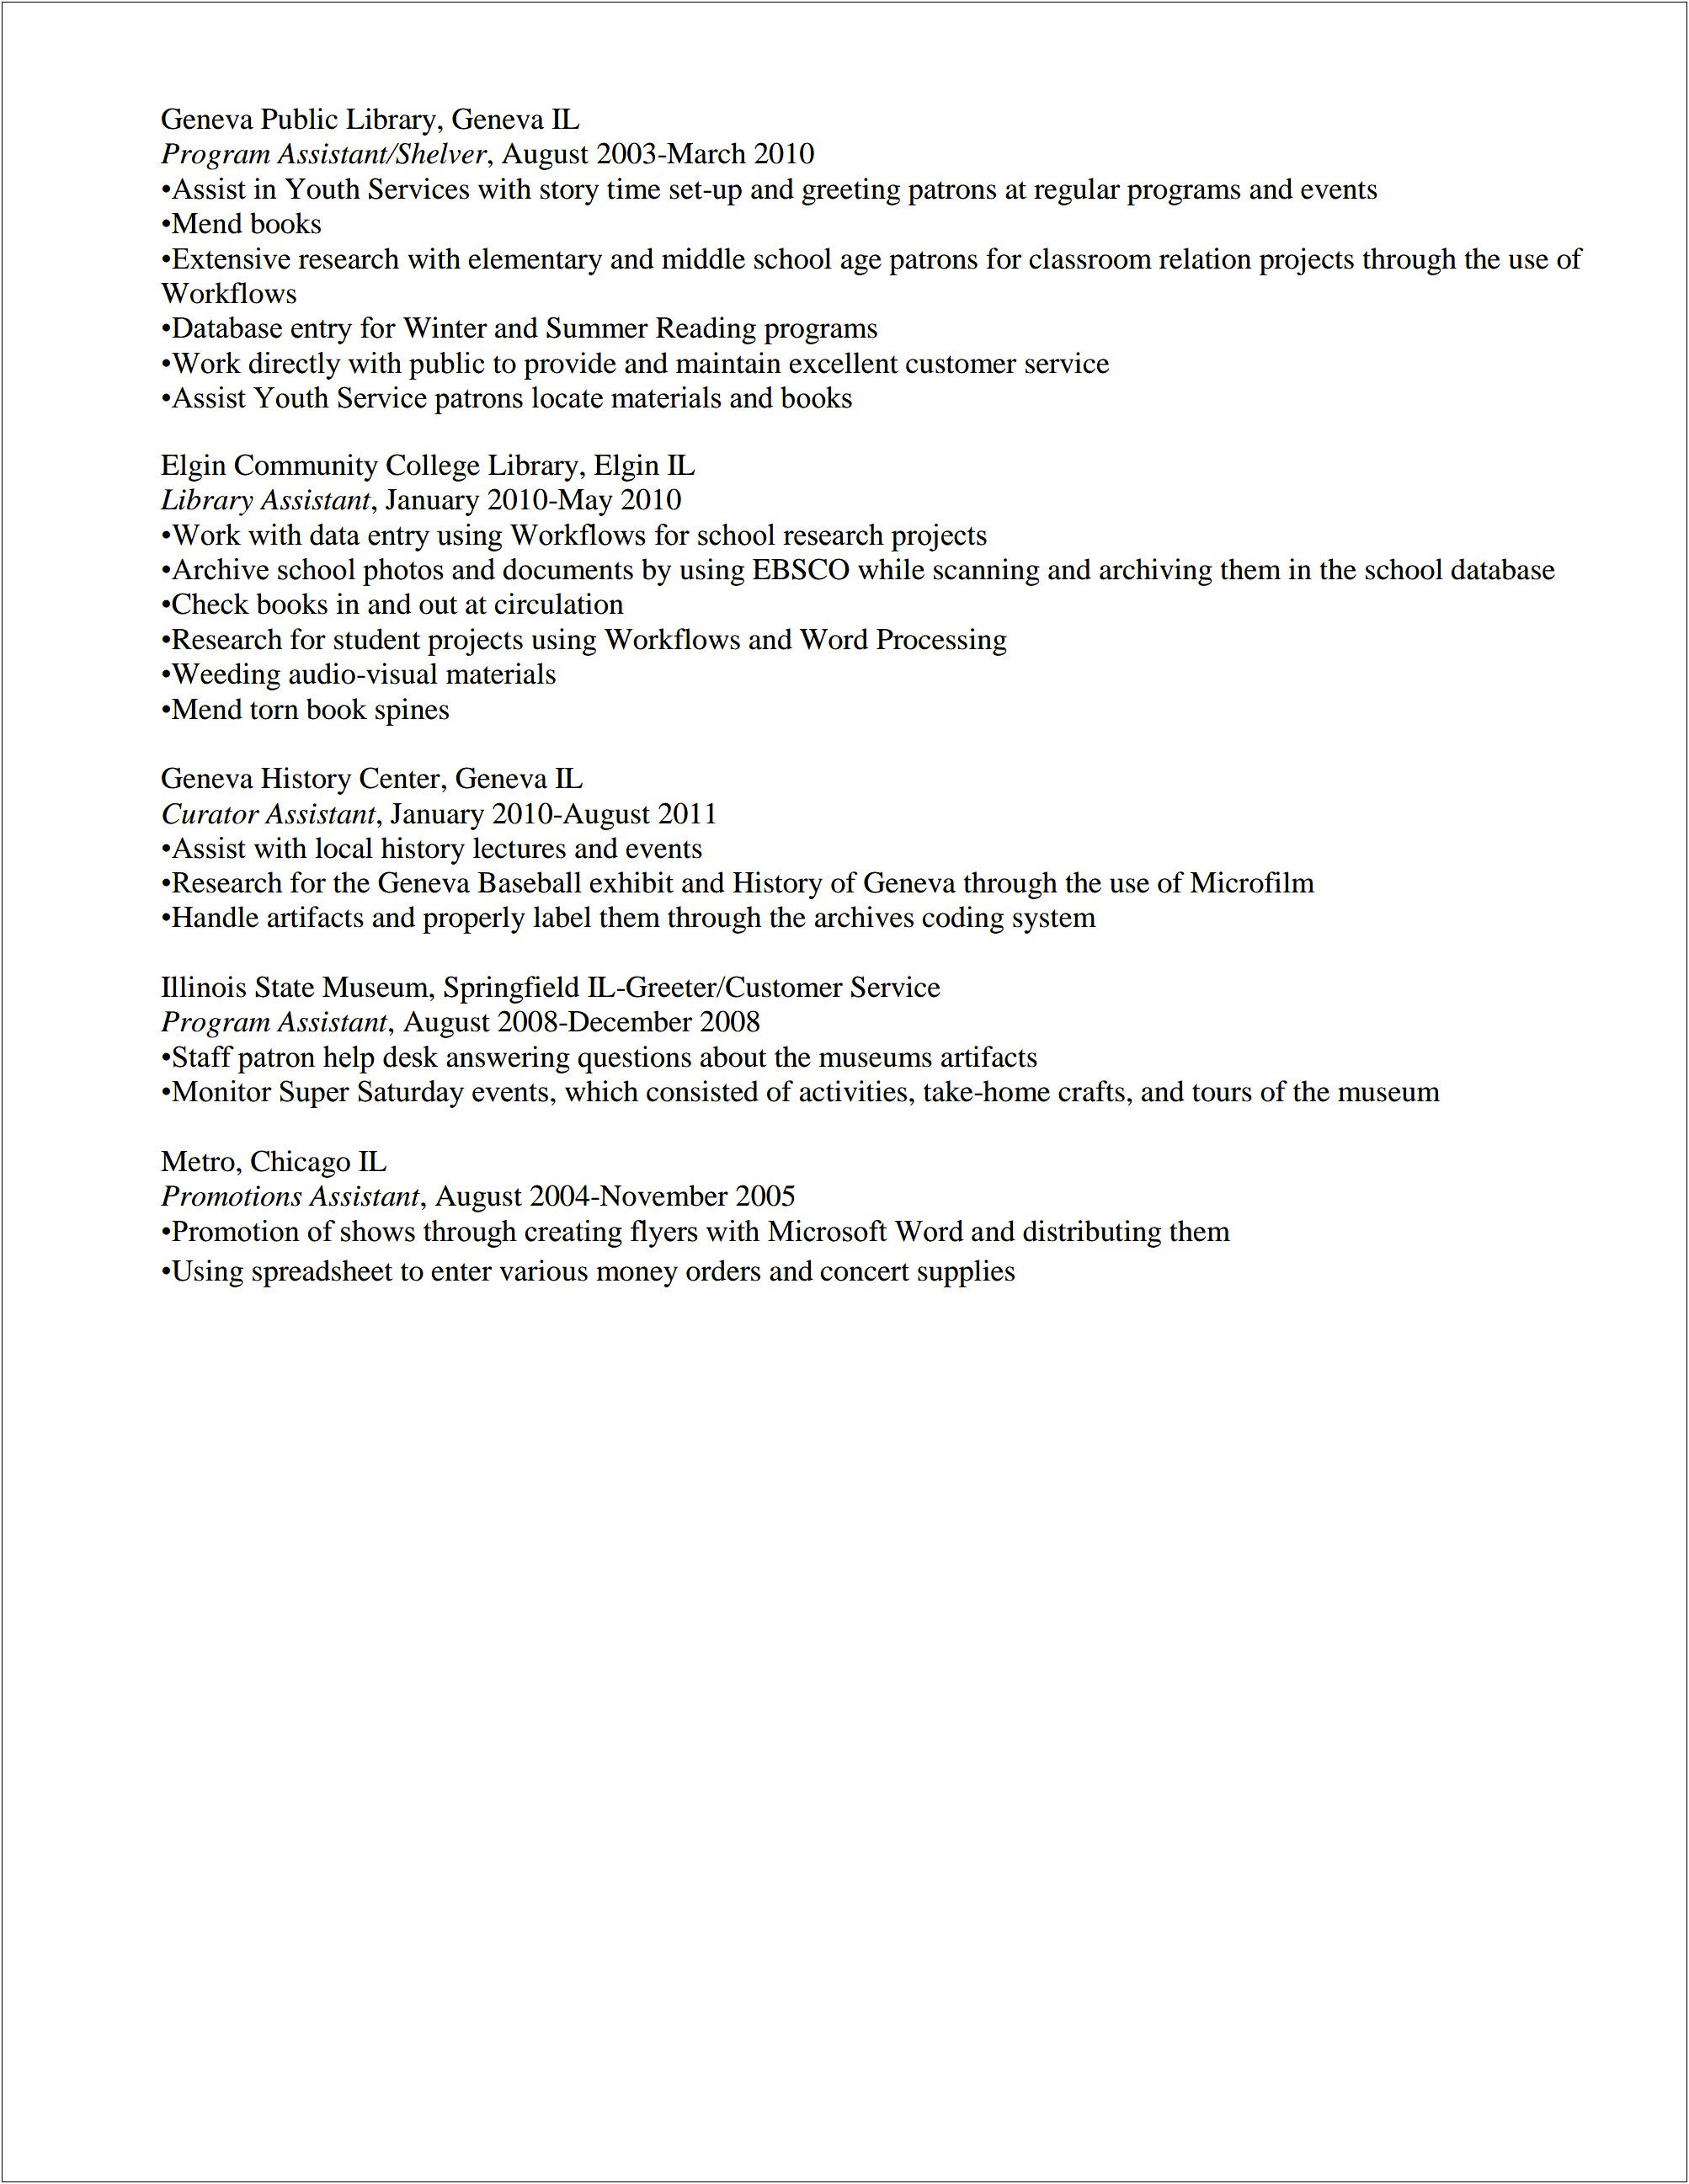 Resume And Cover Letter Sample For Archiving Staff